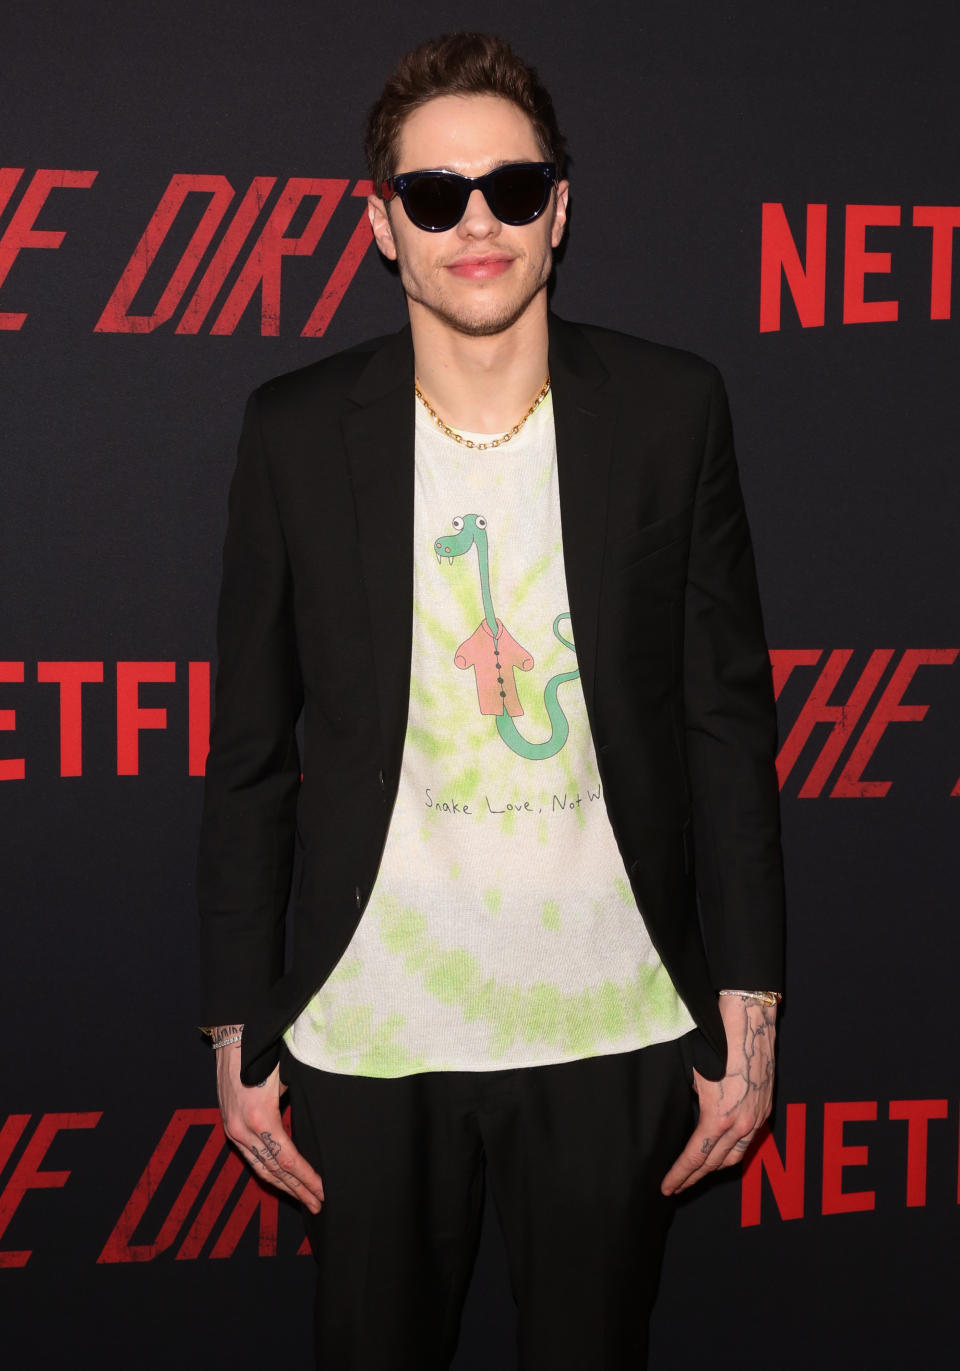 Actor Pete Davidson attends the Premiere Of Netflix's "The Dirt" at ArcLight Hollywood on March 18, 2019 in Hollywood, California. (Photo by Paul Archuleta/FilmMagic)